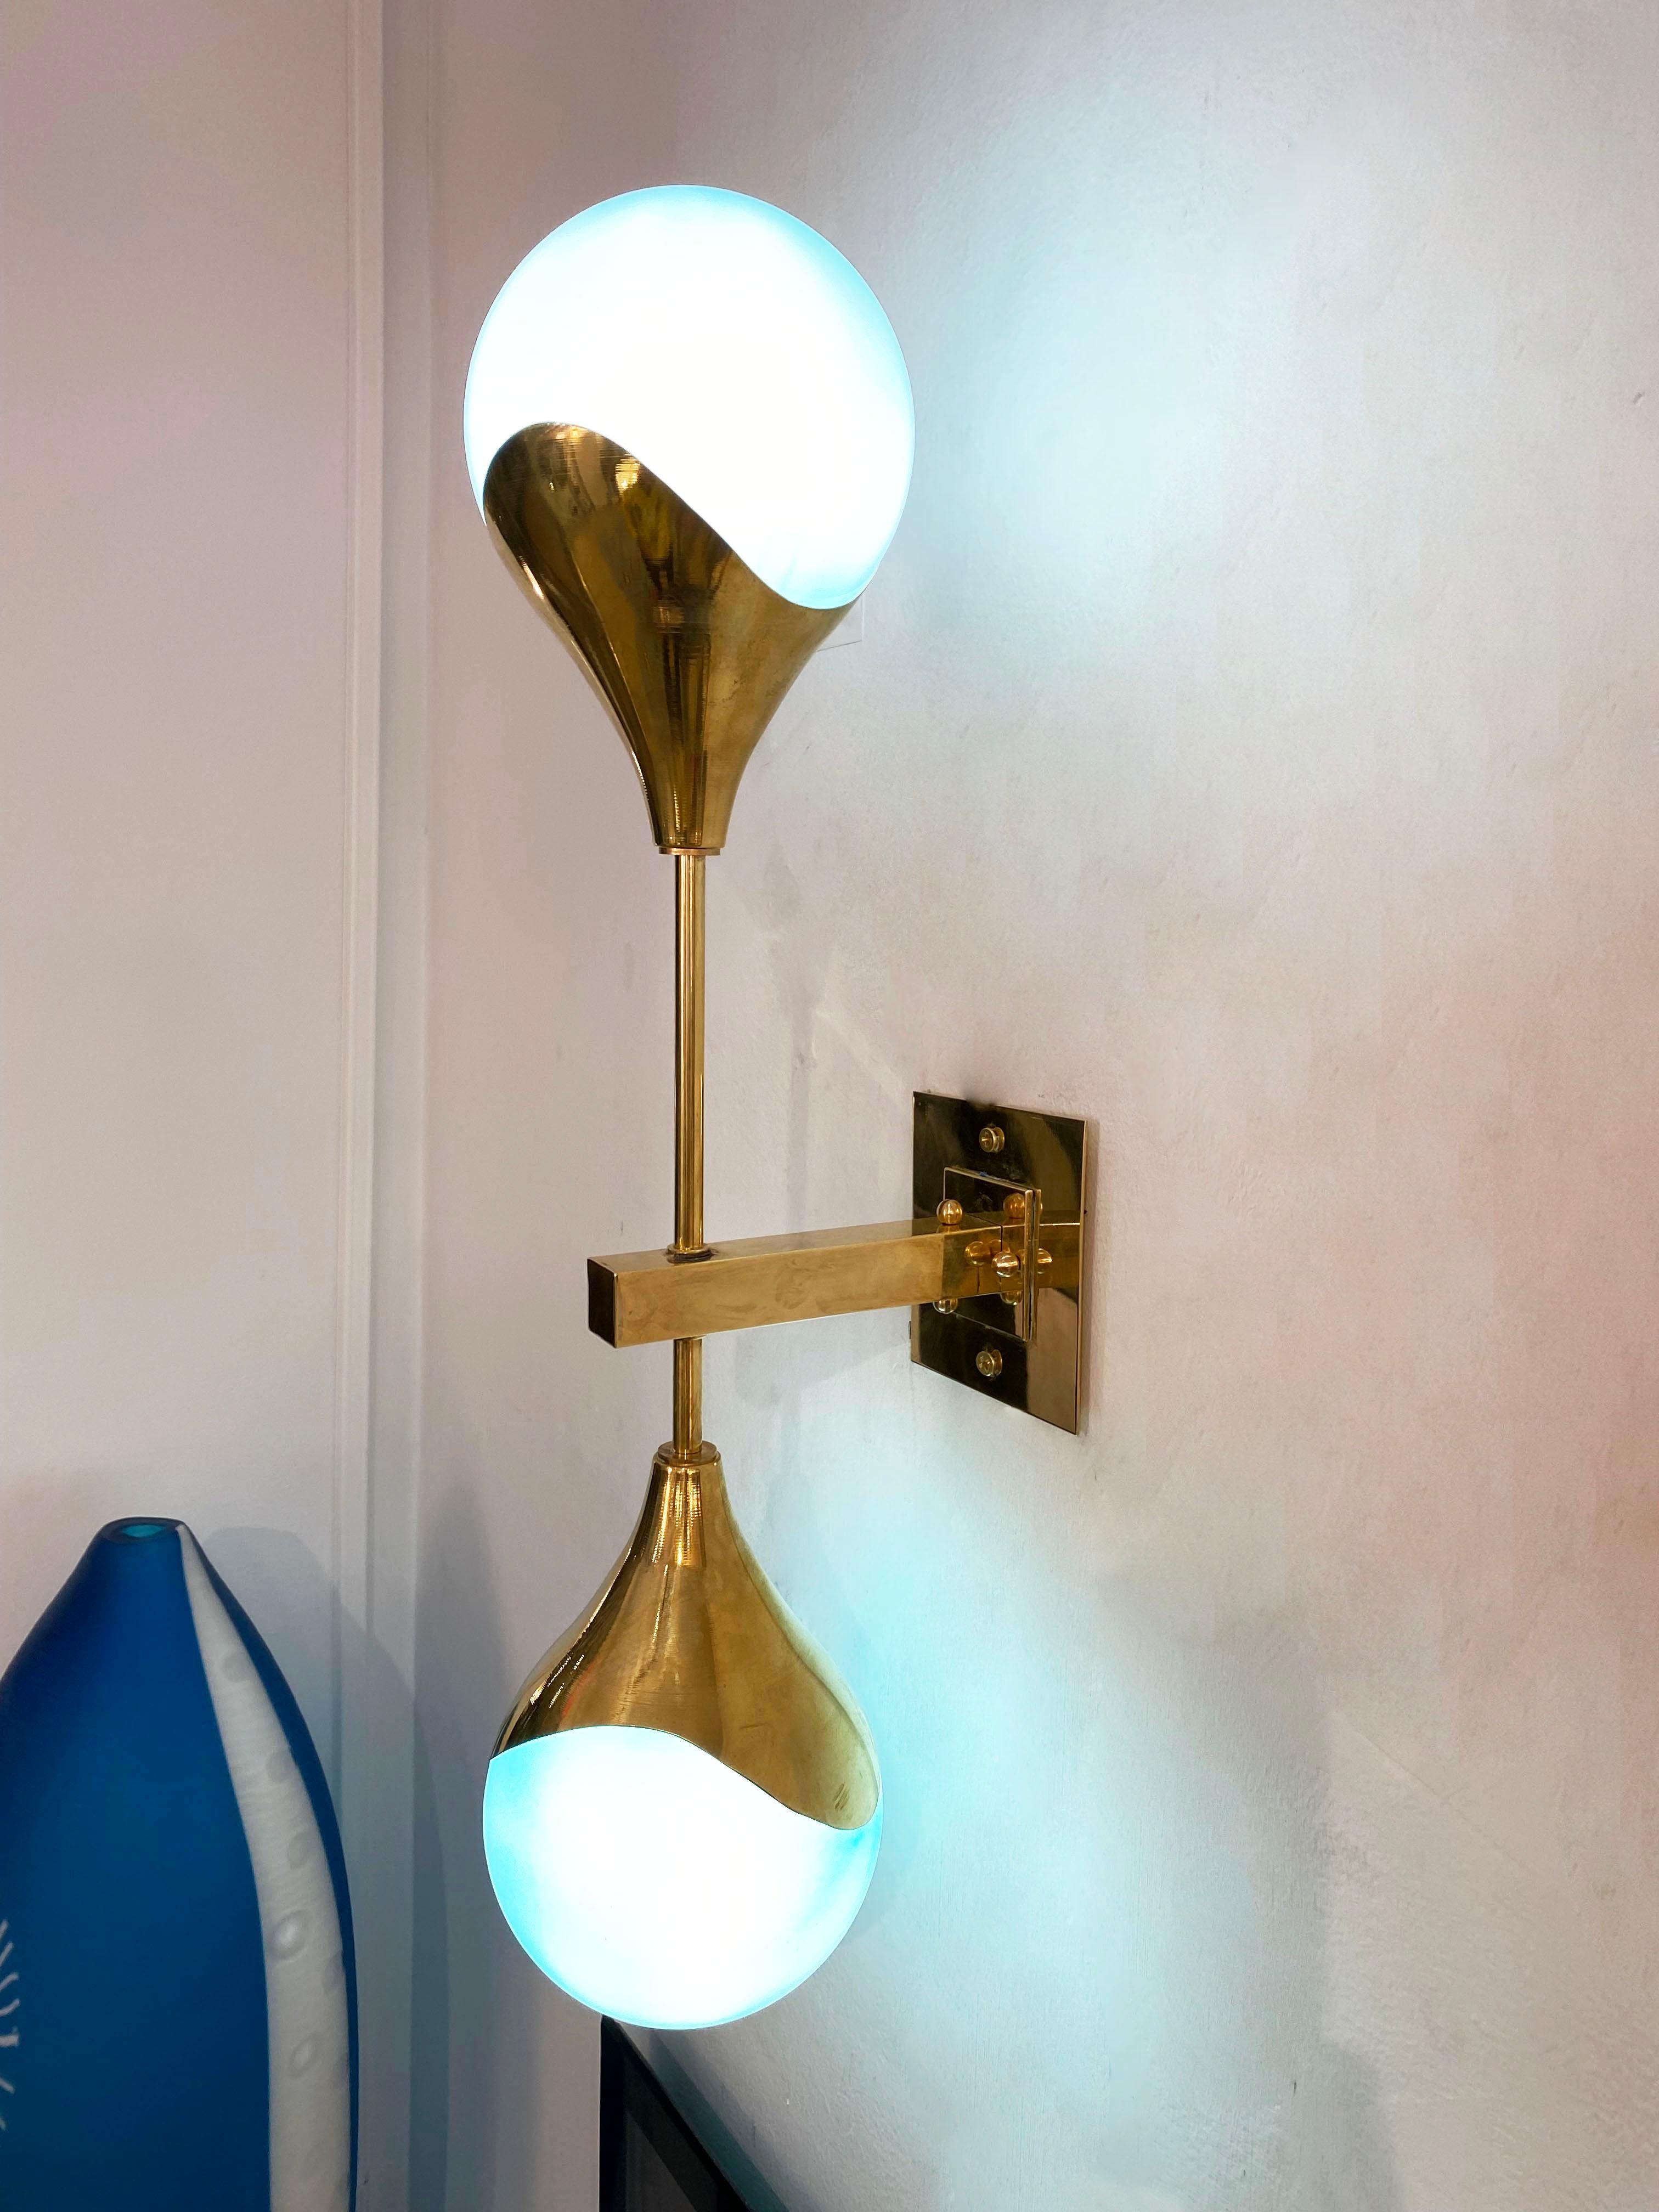 Contemporary Mid-Century Modern Stilnovo style sconces in brass, entirely handcrafted in Italy, with light blue turquoise glass shades that are overlaid in white glass to produce plenty of glowing light when lit. The handmade brass arm supports two